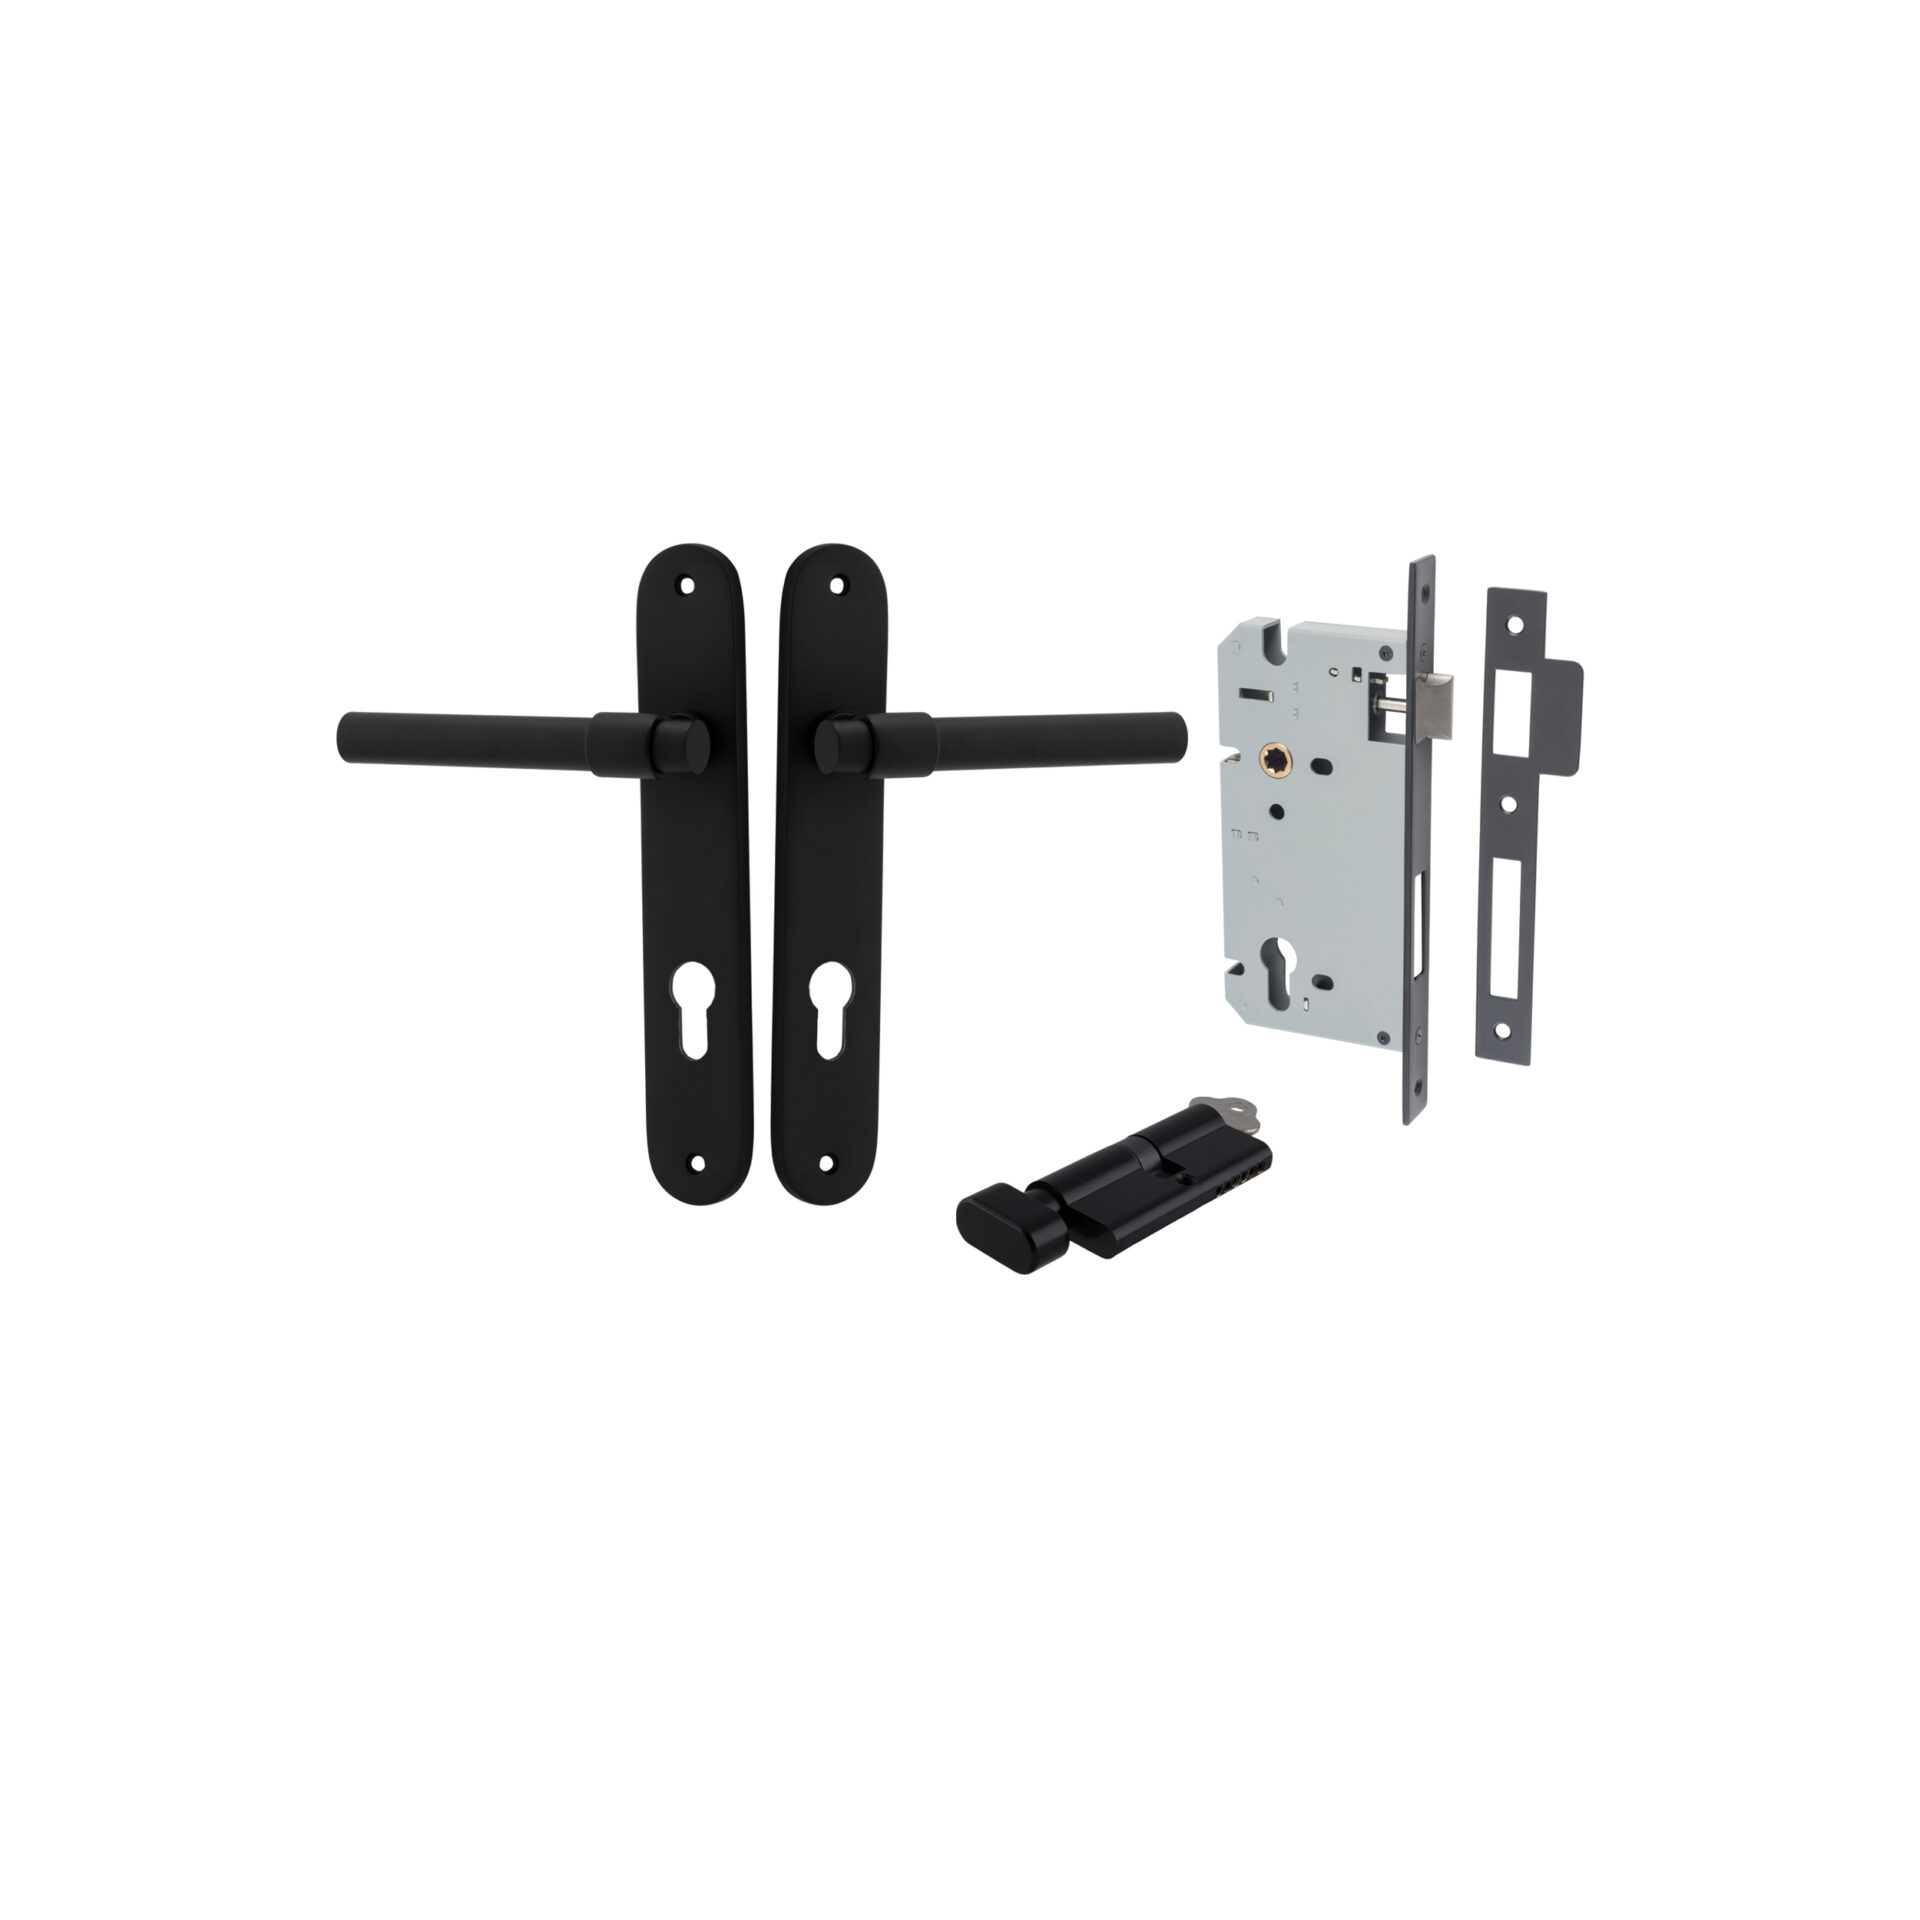 Helsinki Lever - Oval Backplate Entrance Kit with High Security Lock